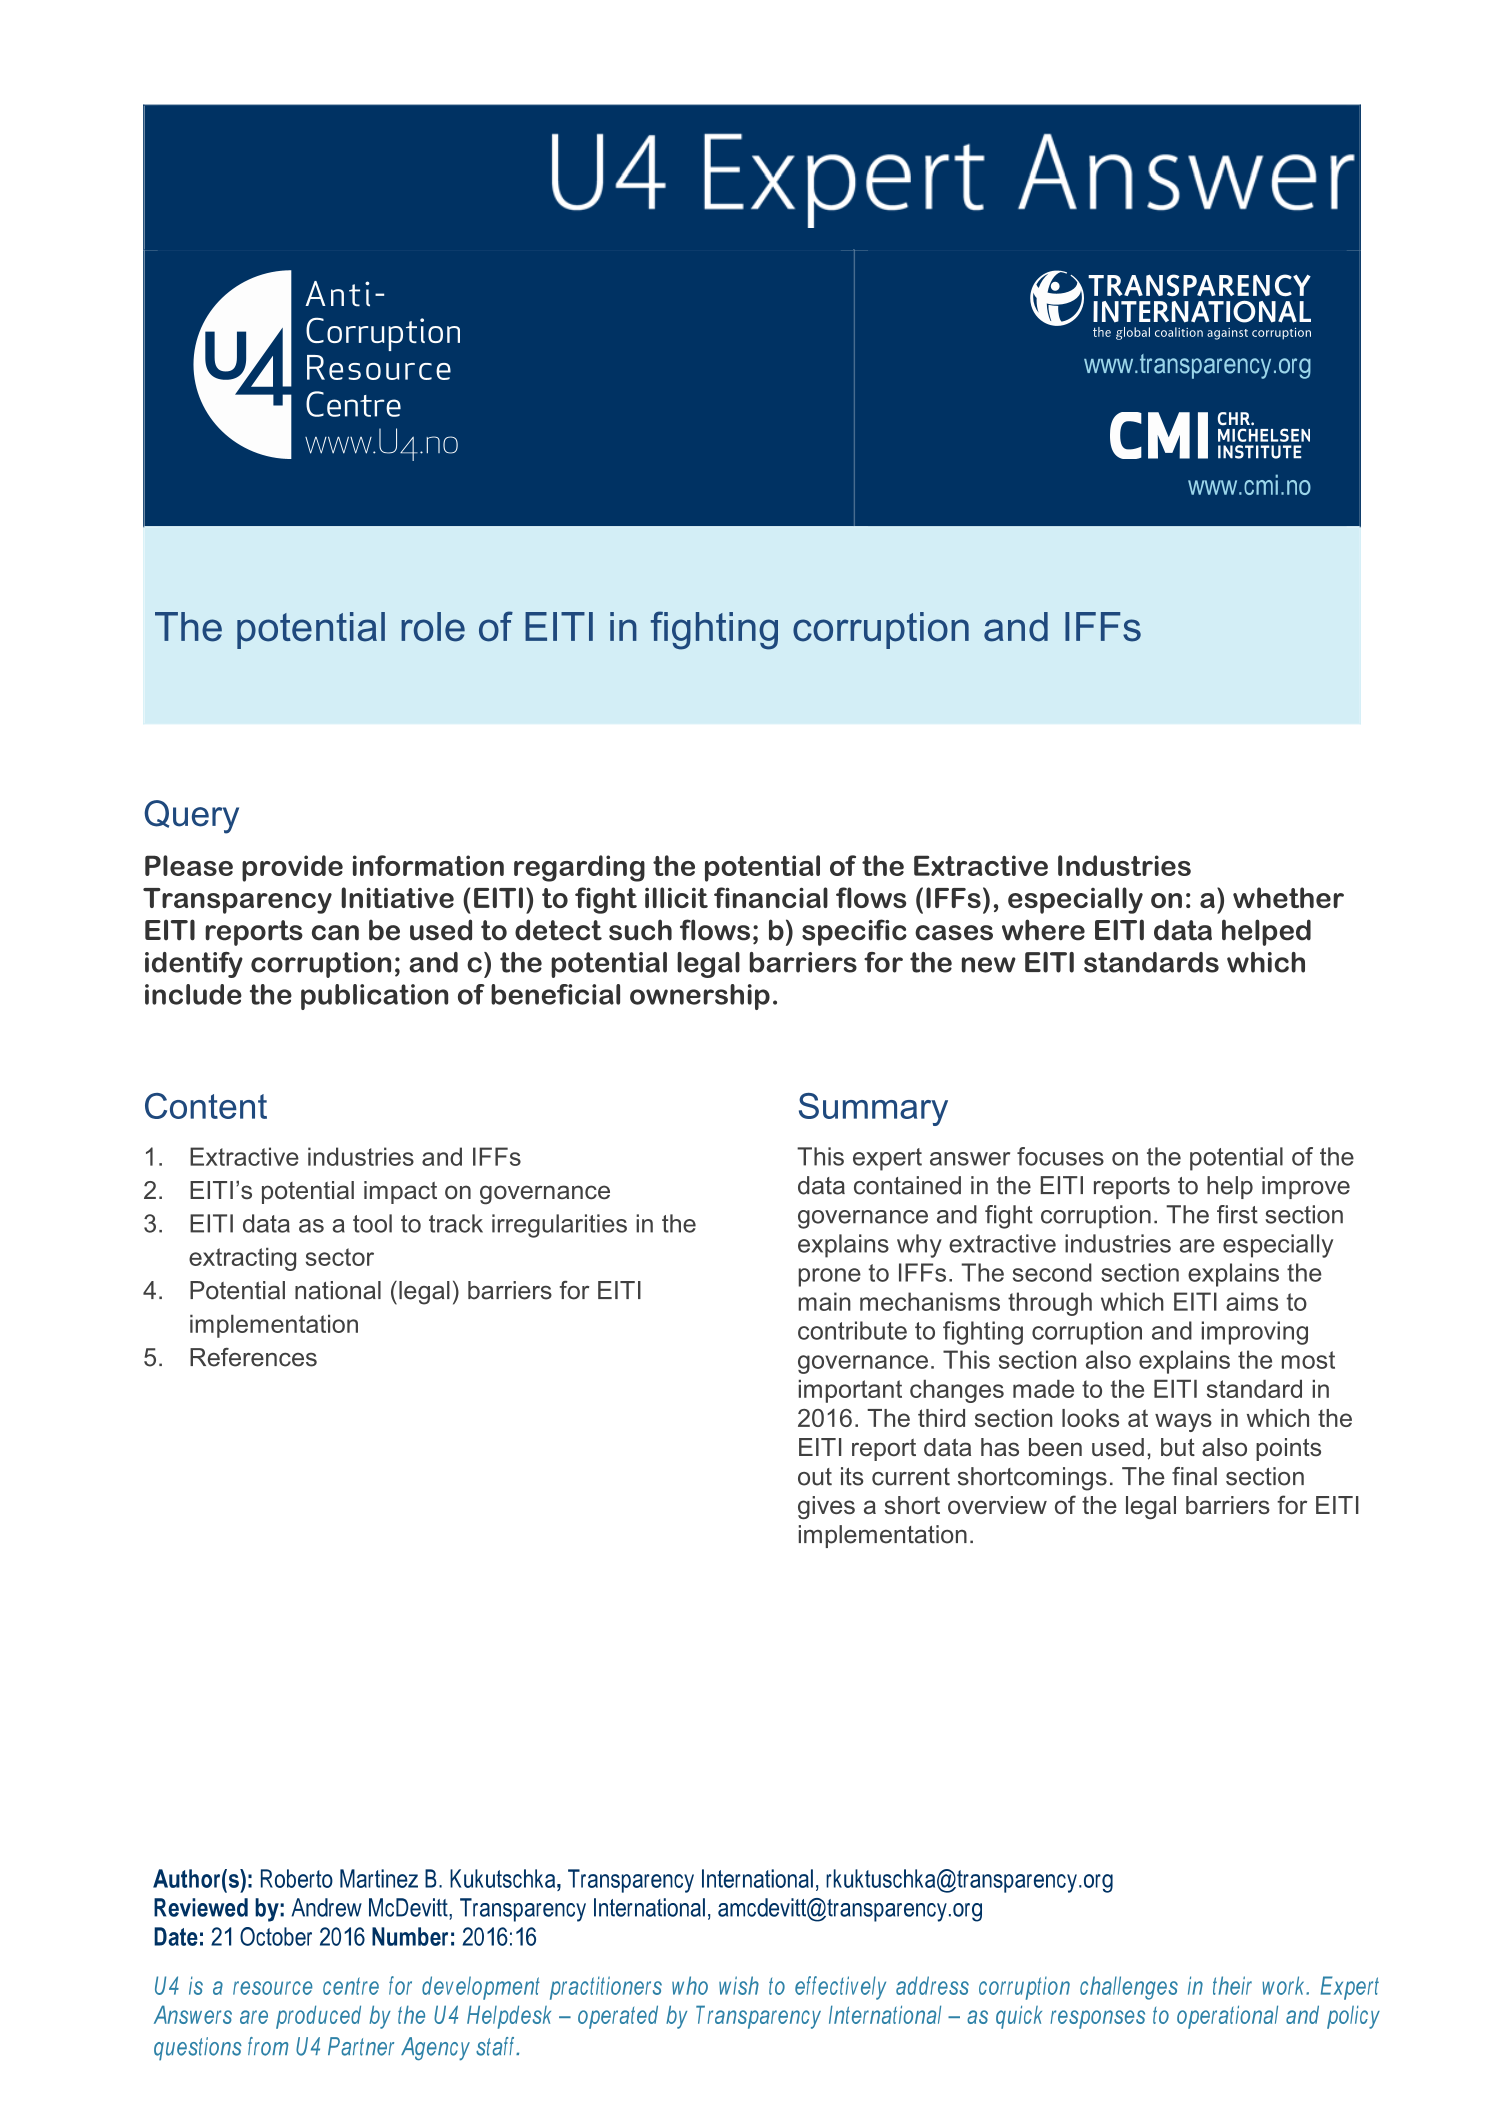 The potential role of EITI in fighting corruption and IFFs